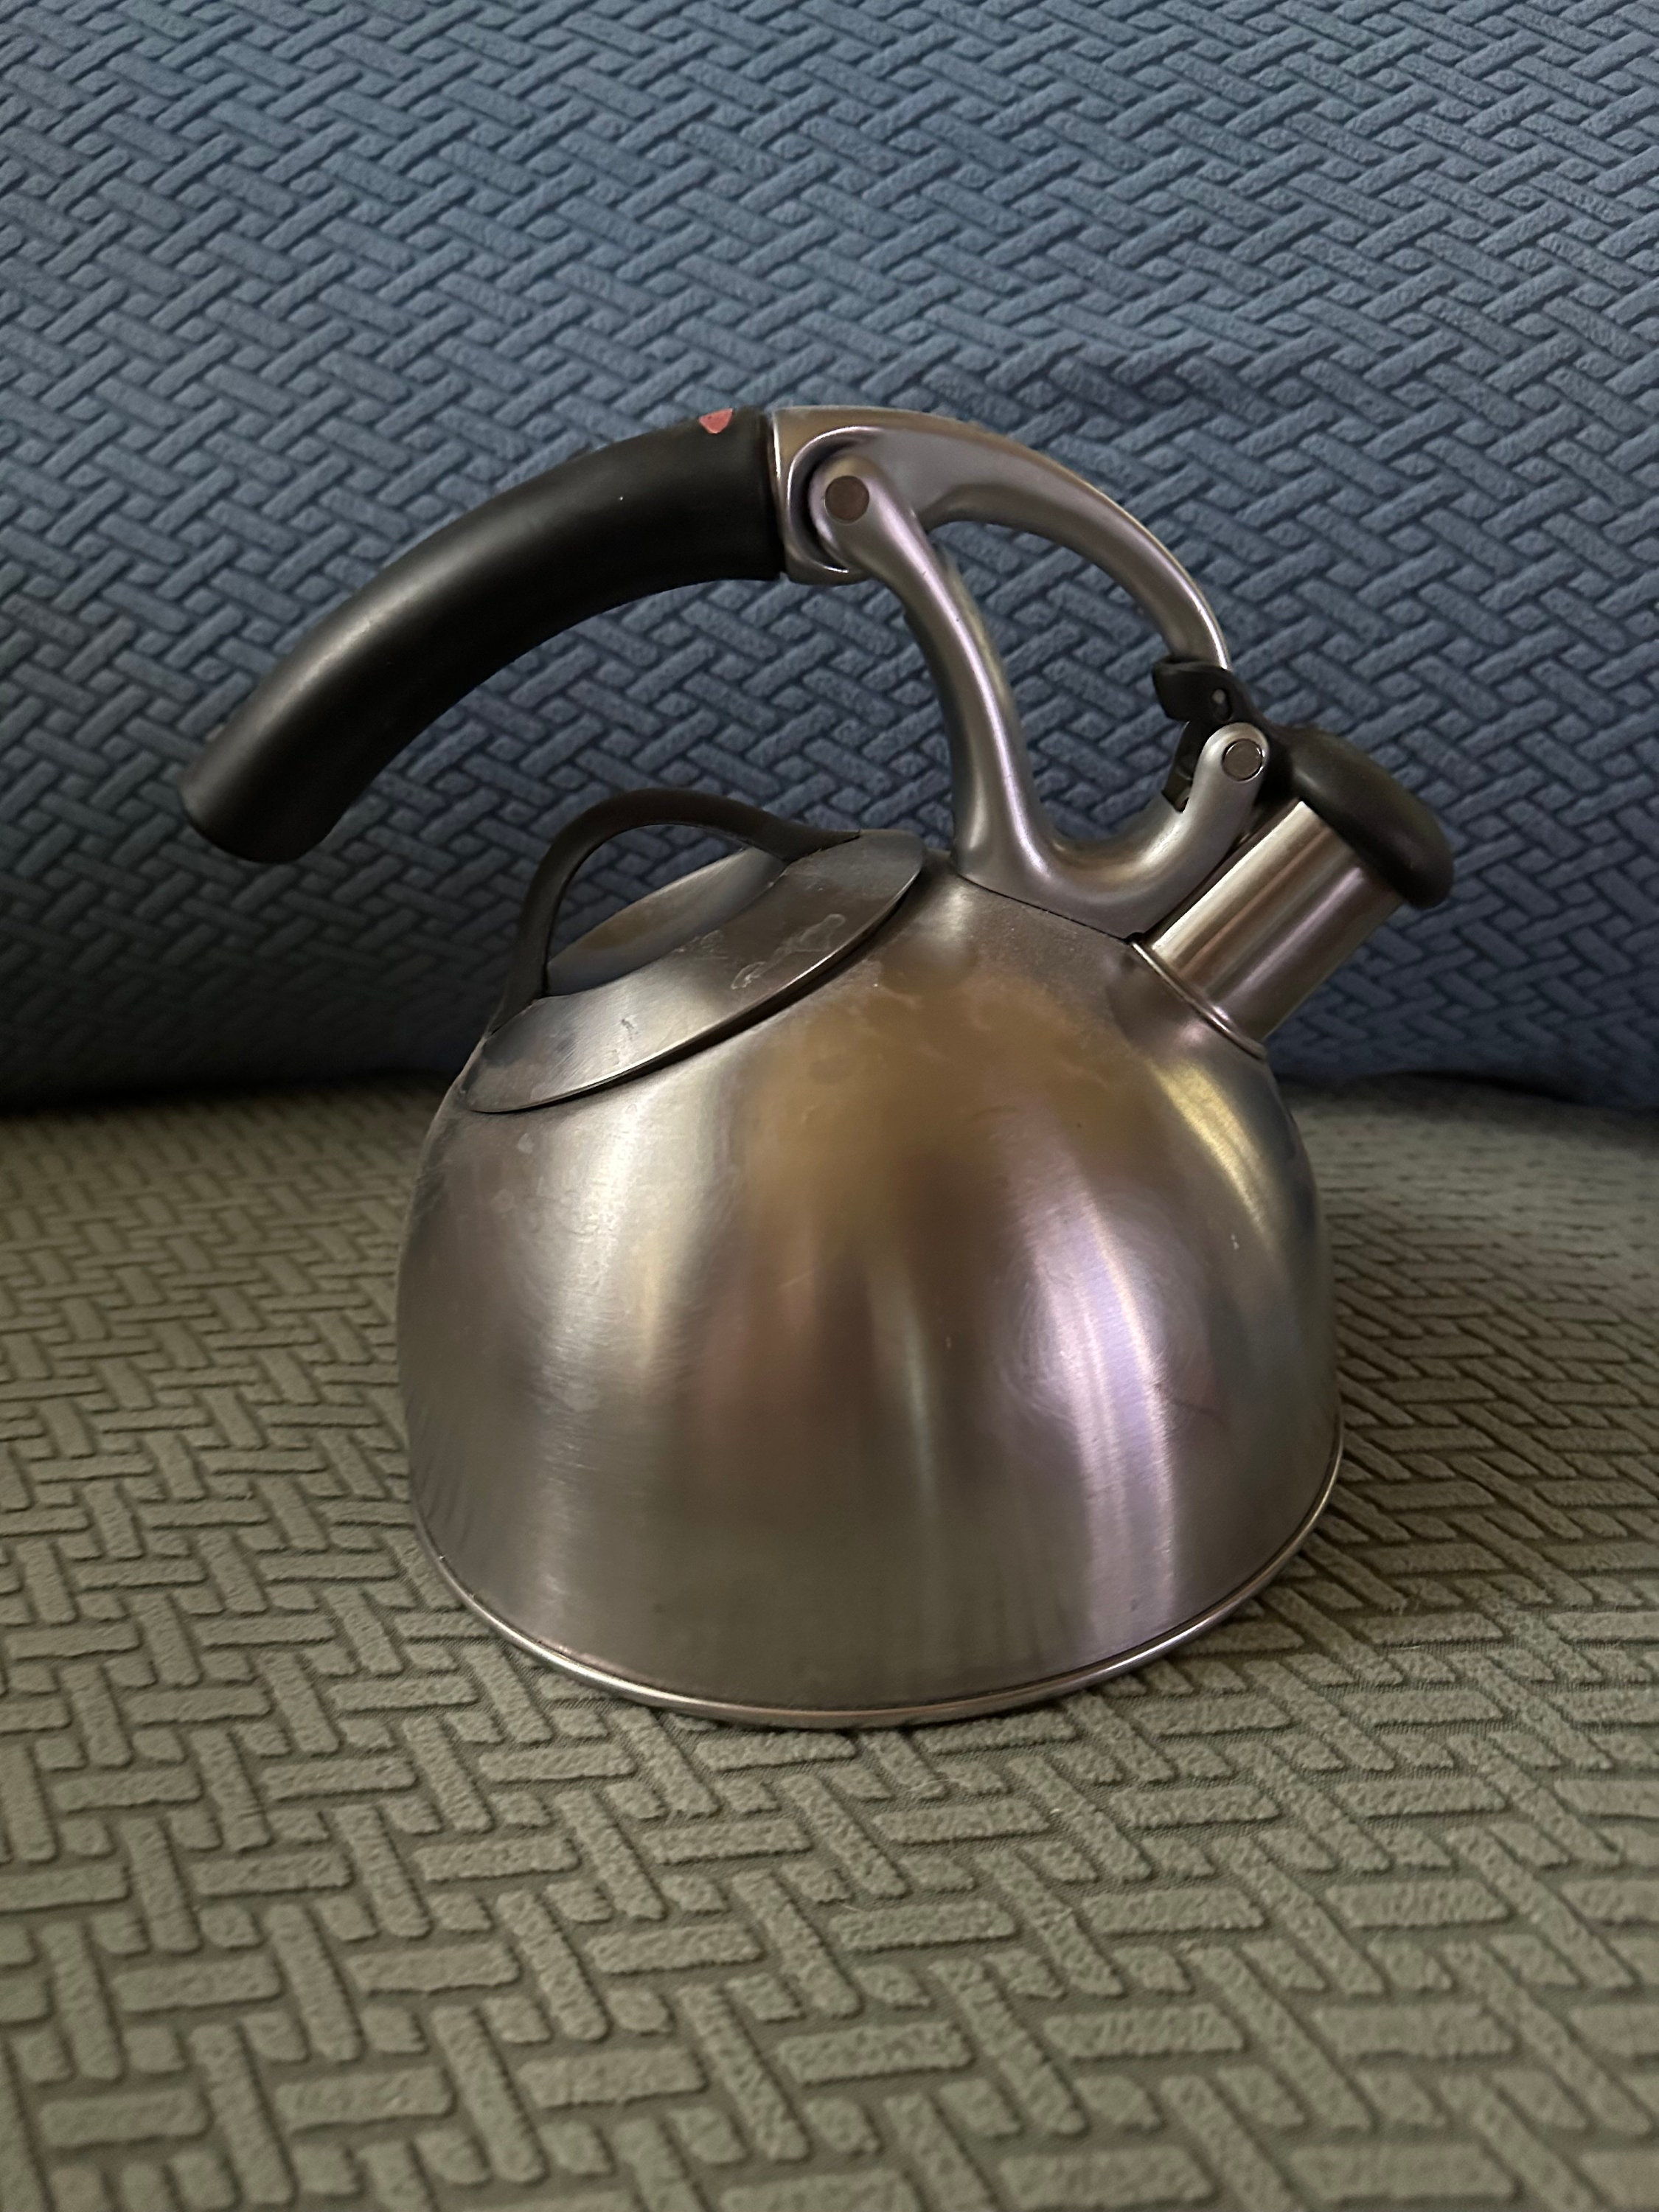 OXO Classic Brushed Stainless Steel Stovetop Whistling Tea Kettle + Reviews